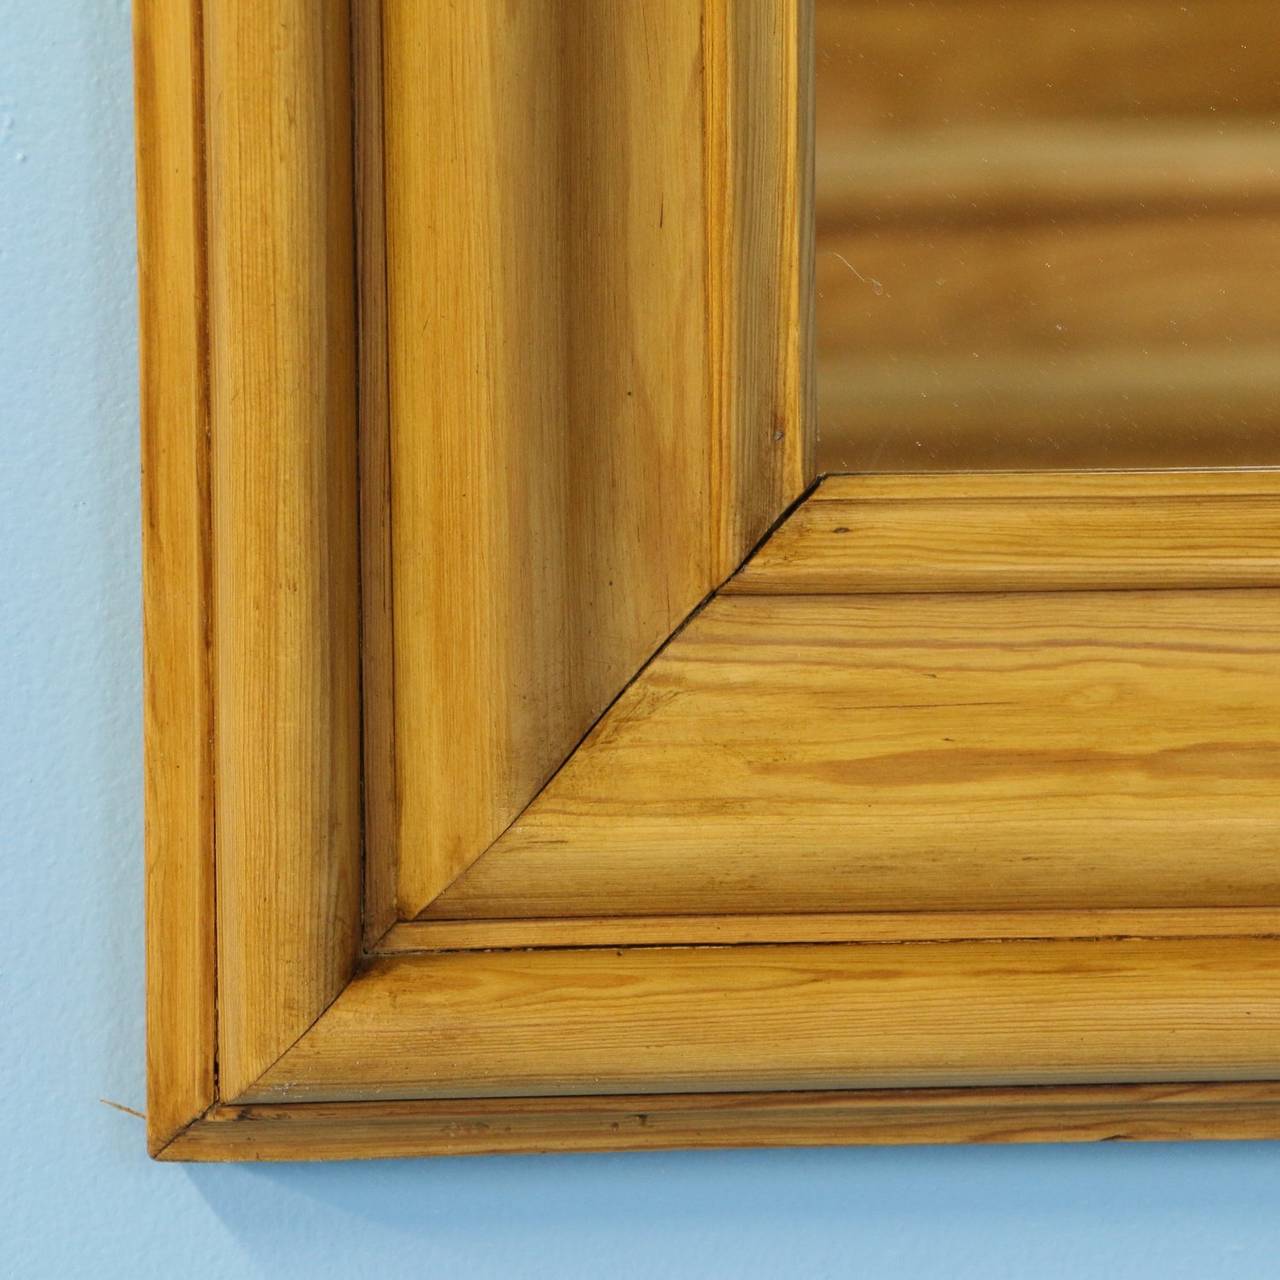 This lovely pine mirror has been given a wax finish, bringing out the warmth of the wood. View the close up photo to appreciate the simple details.